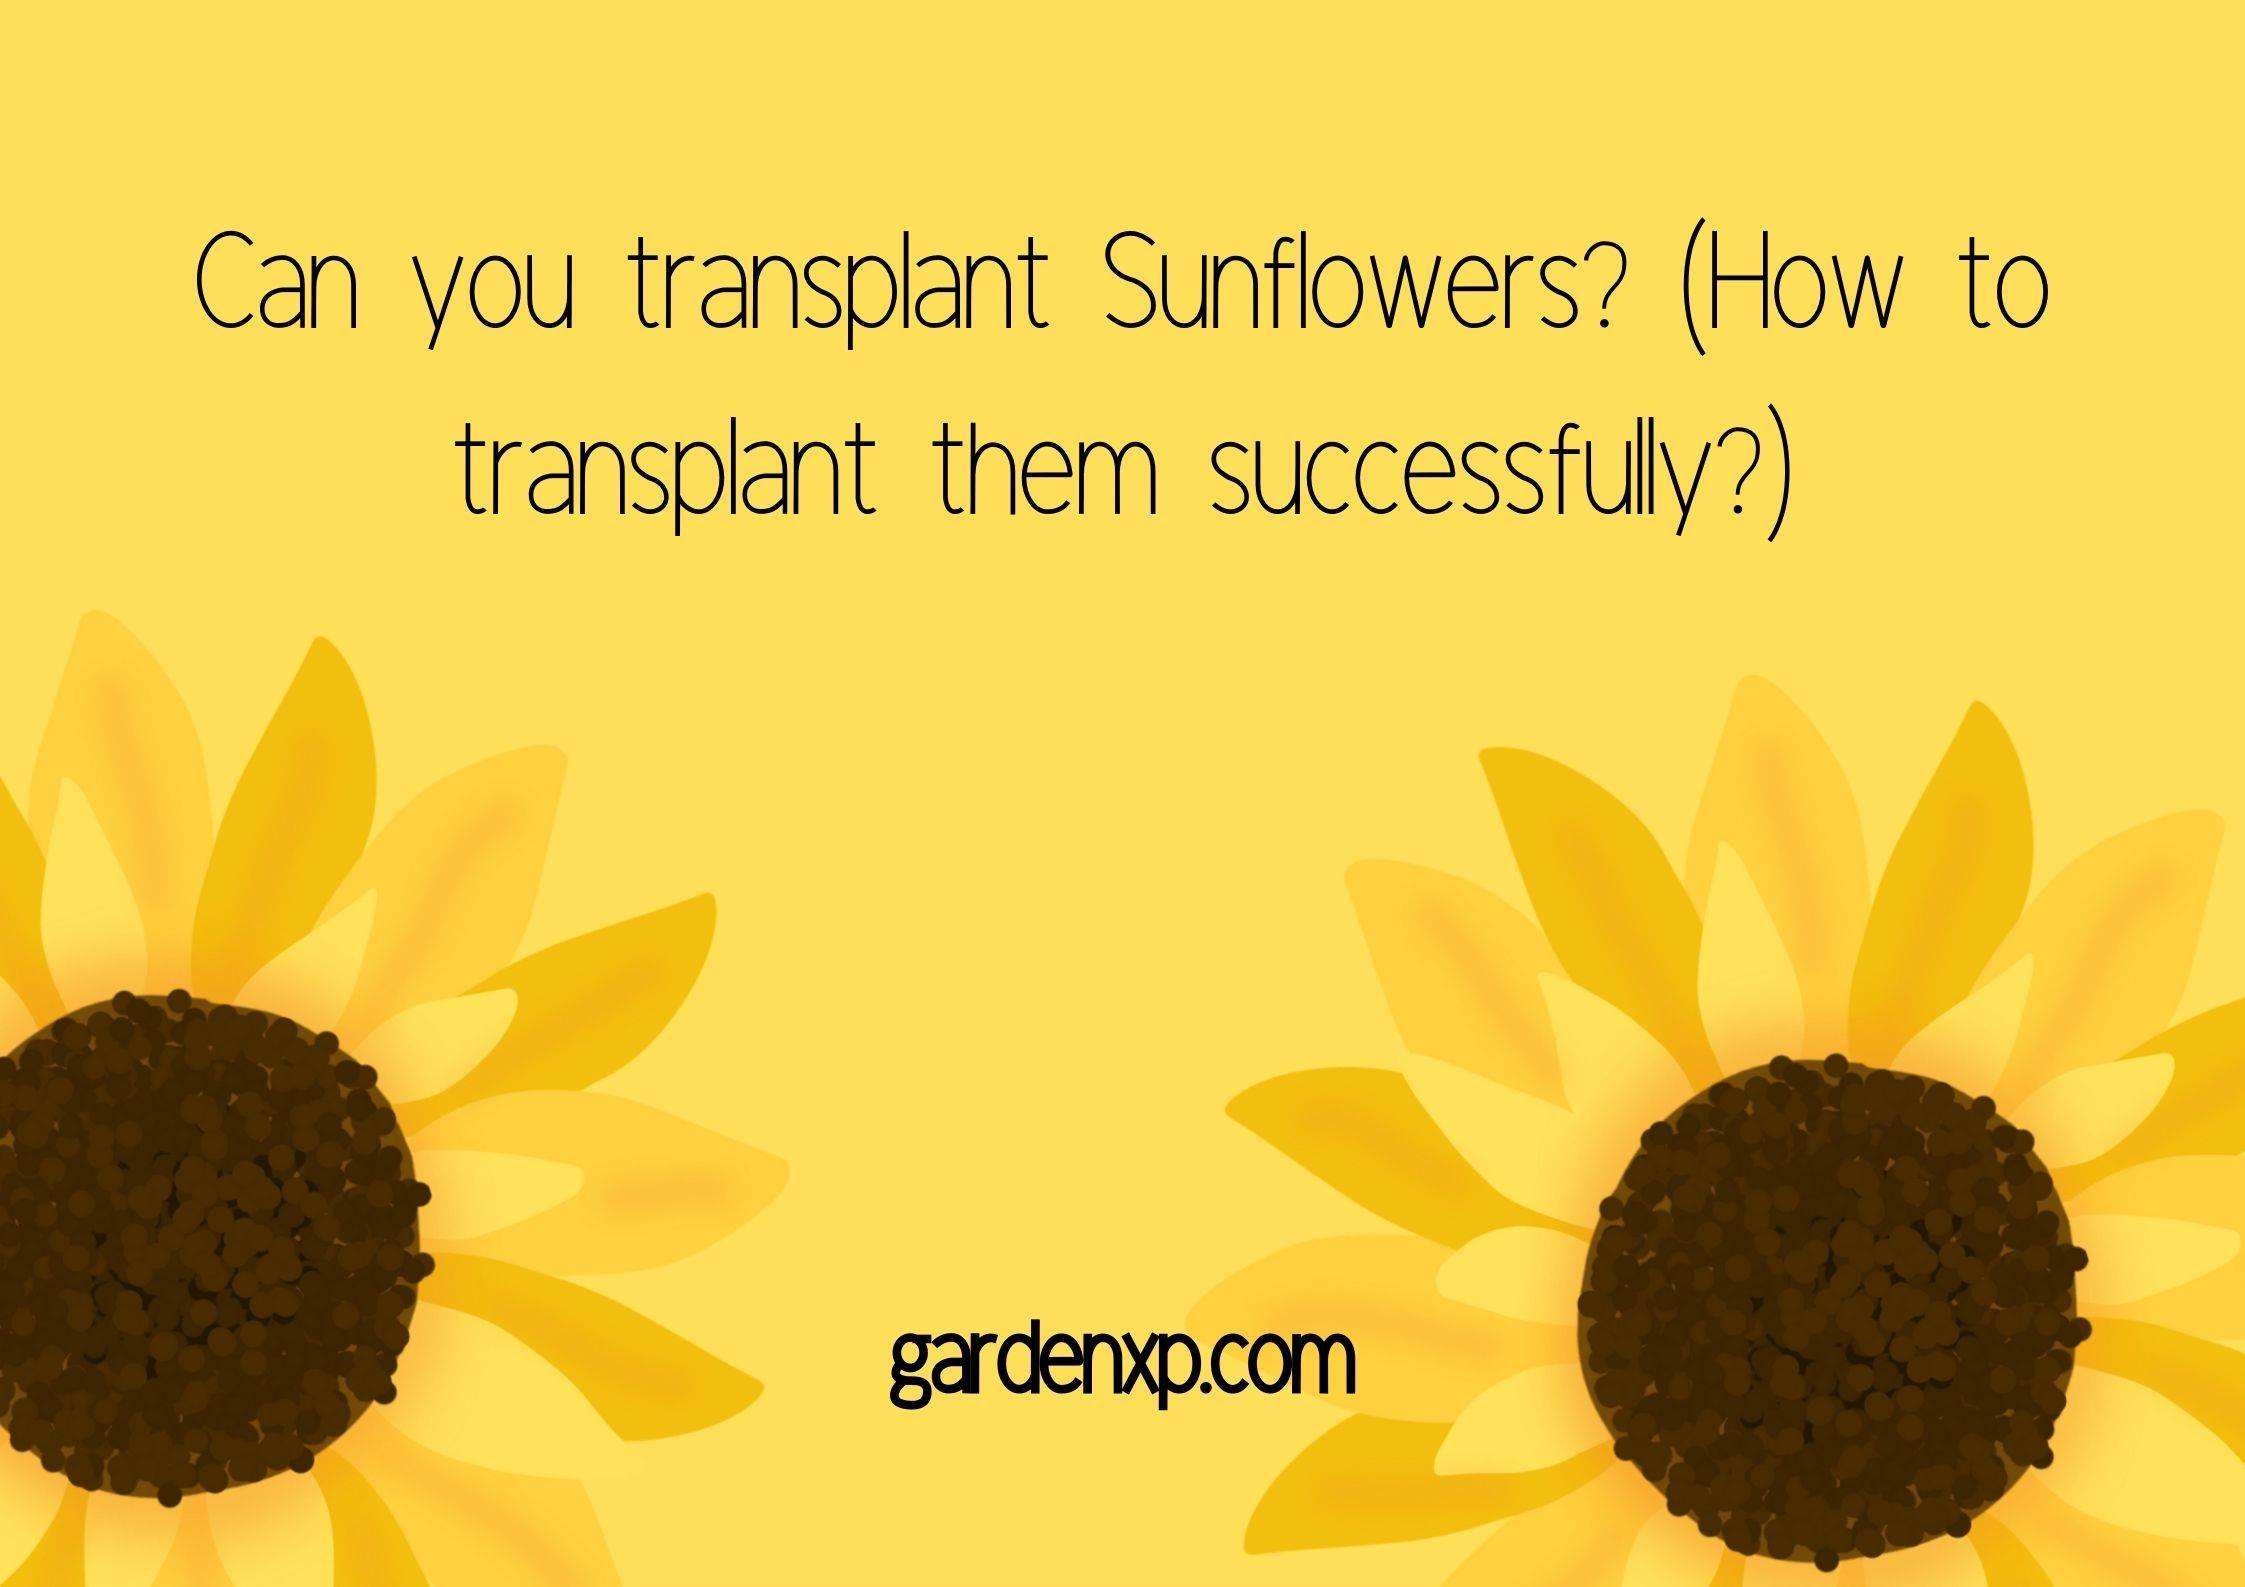 Can you transplant Sunflowers? (How to transplant them successfully?)